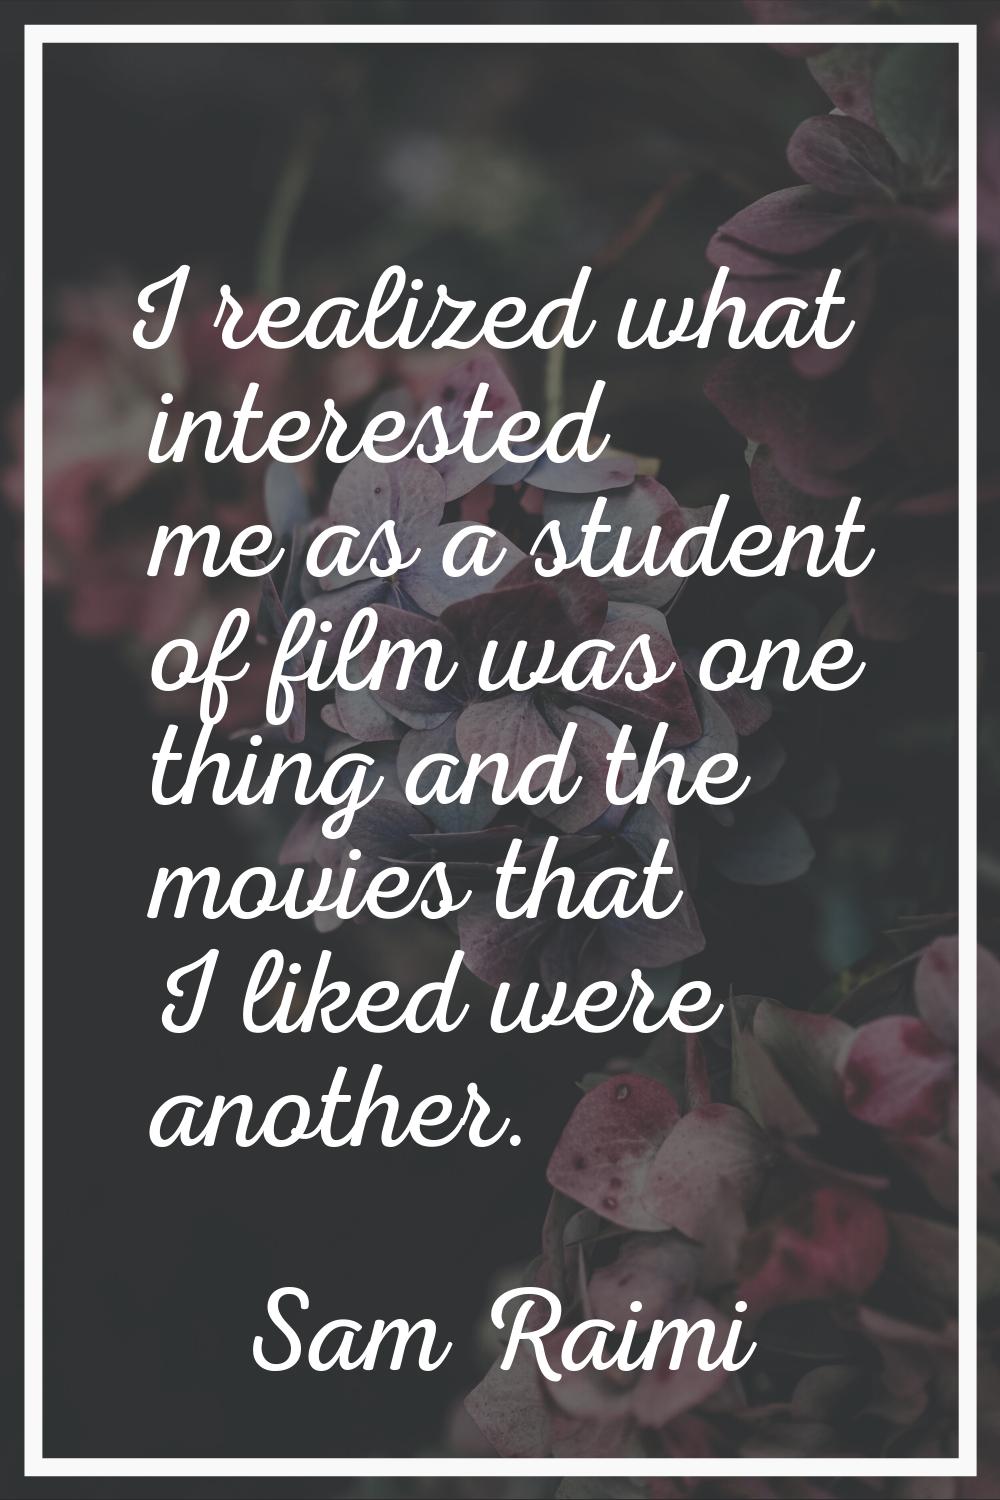 I realized what interested me as a student of film was one thing and the movies that I liked were a